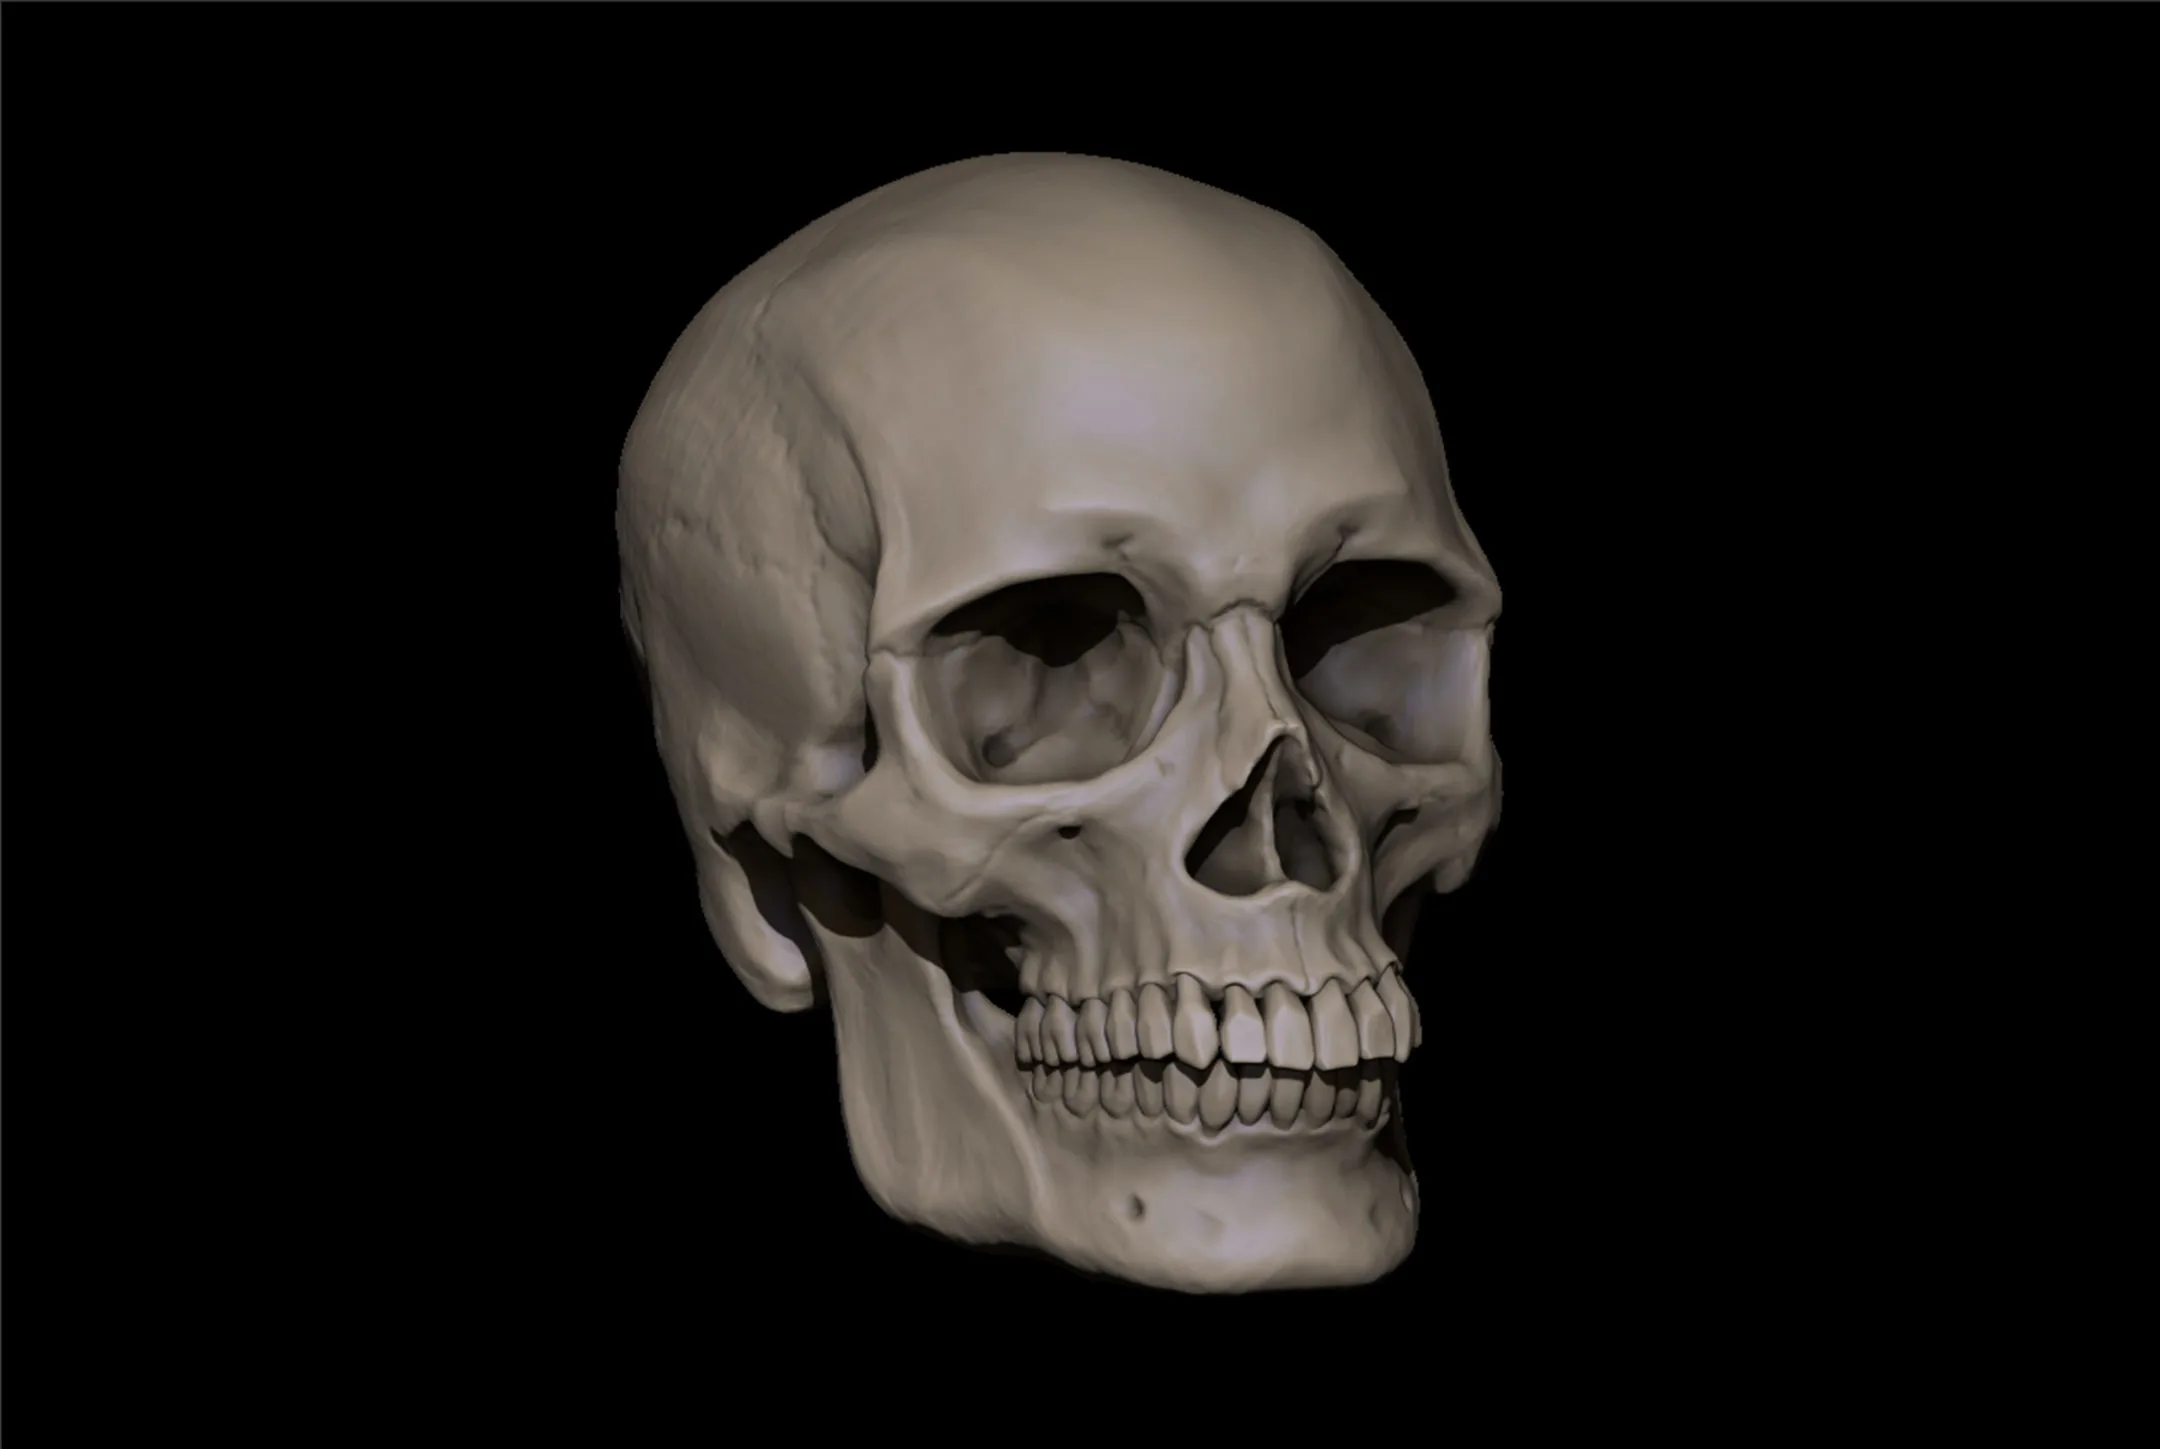 Reference skull - includes stl file ready to print